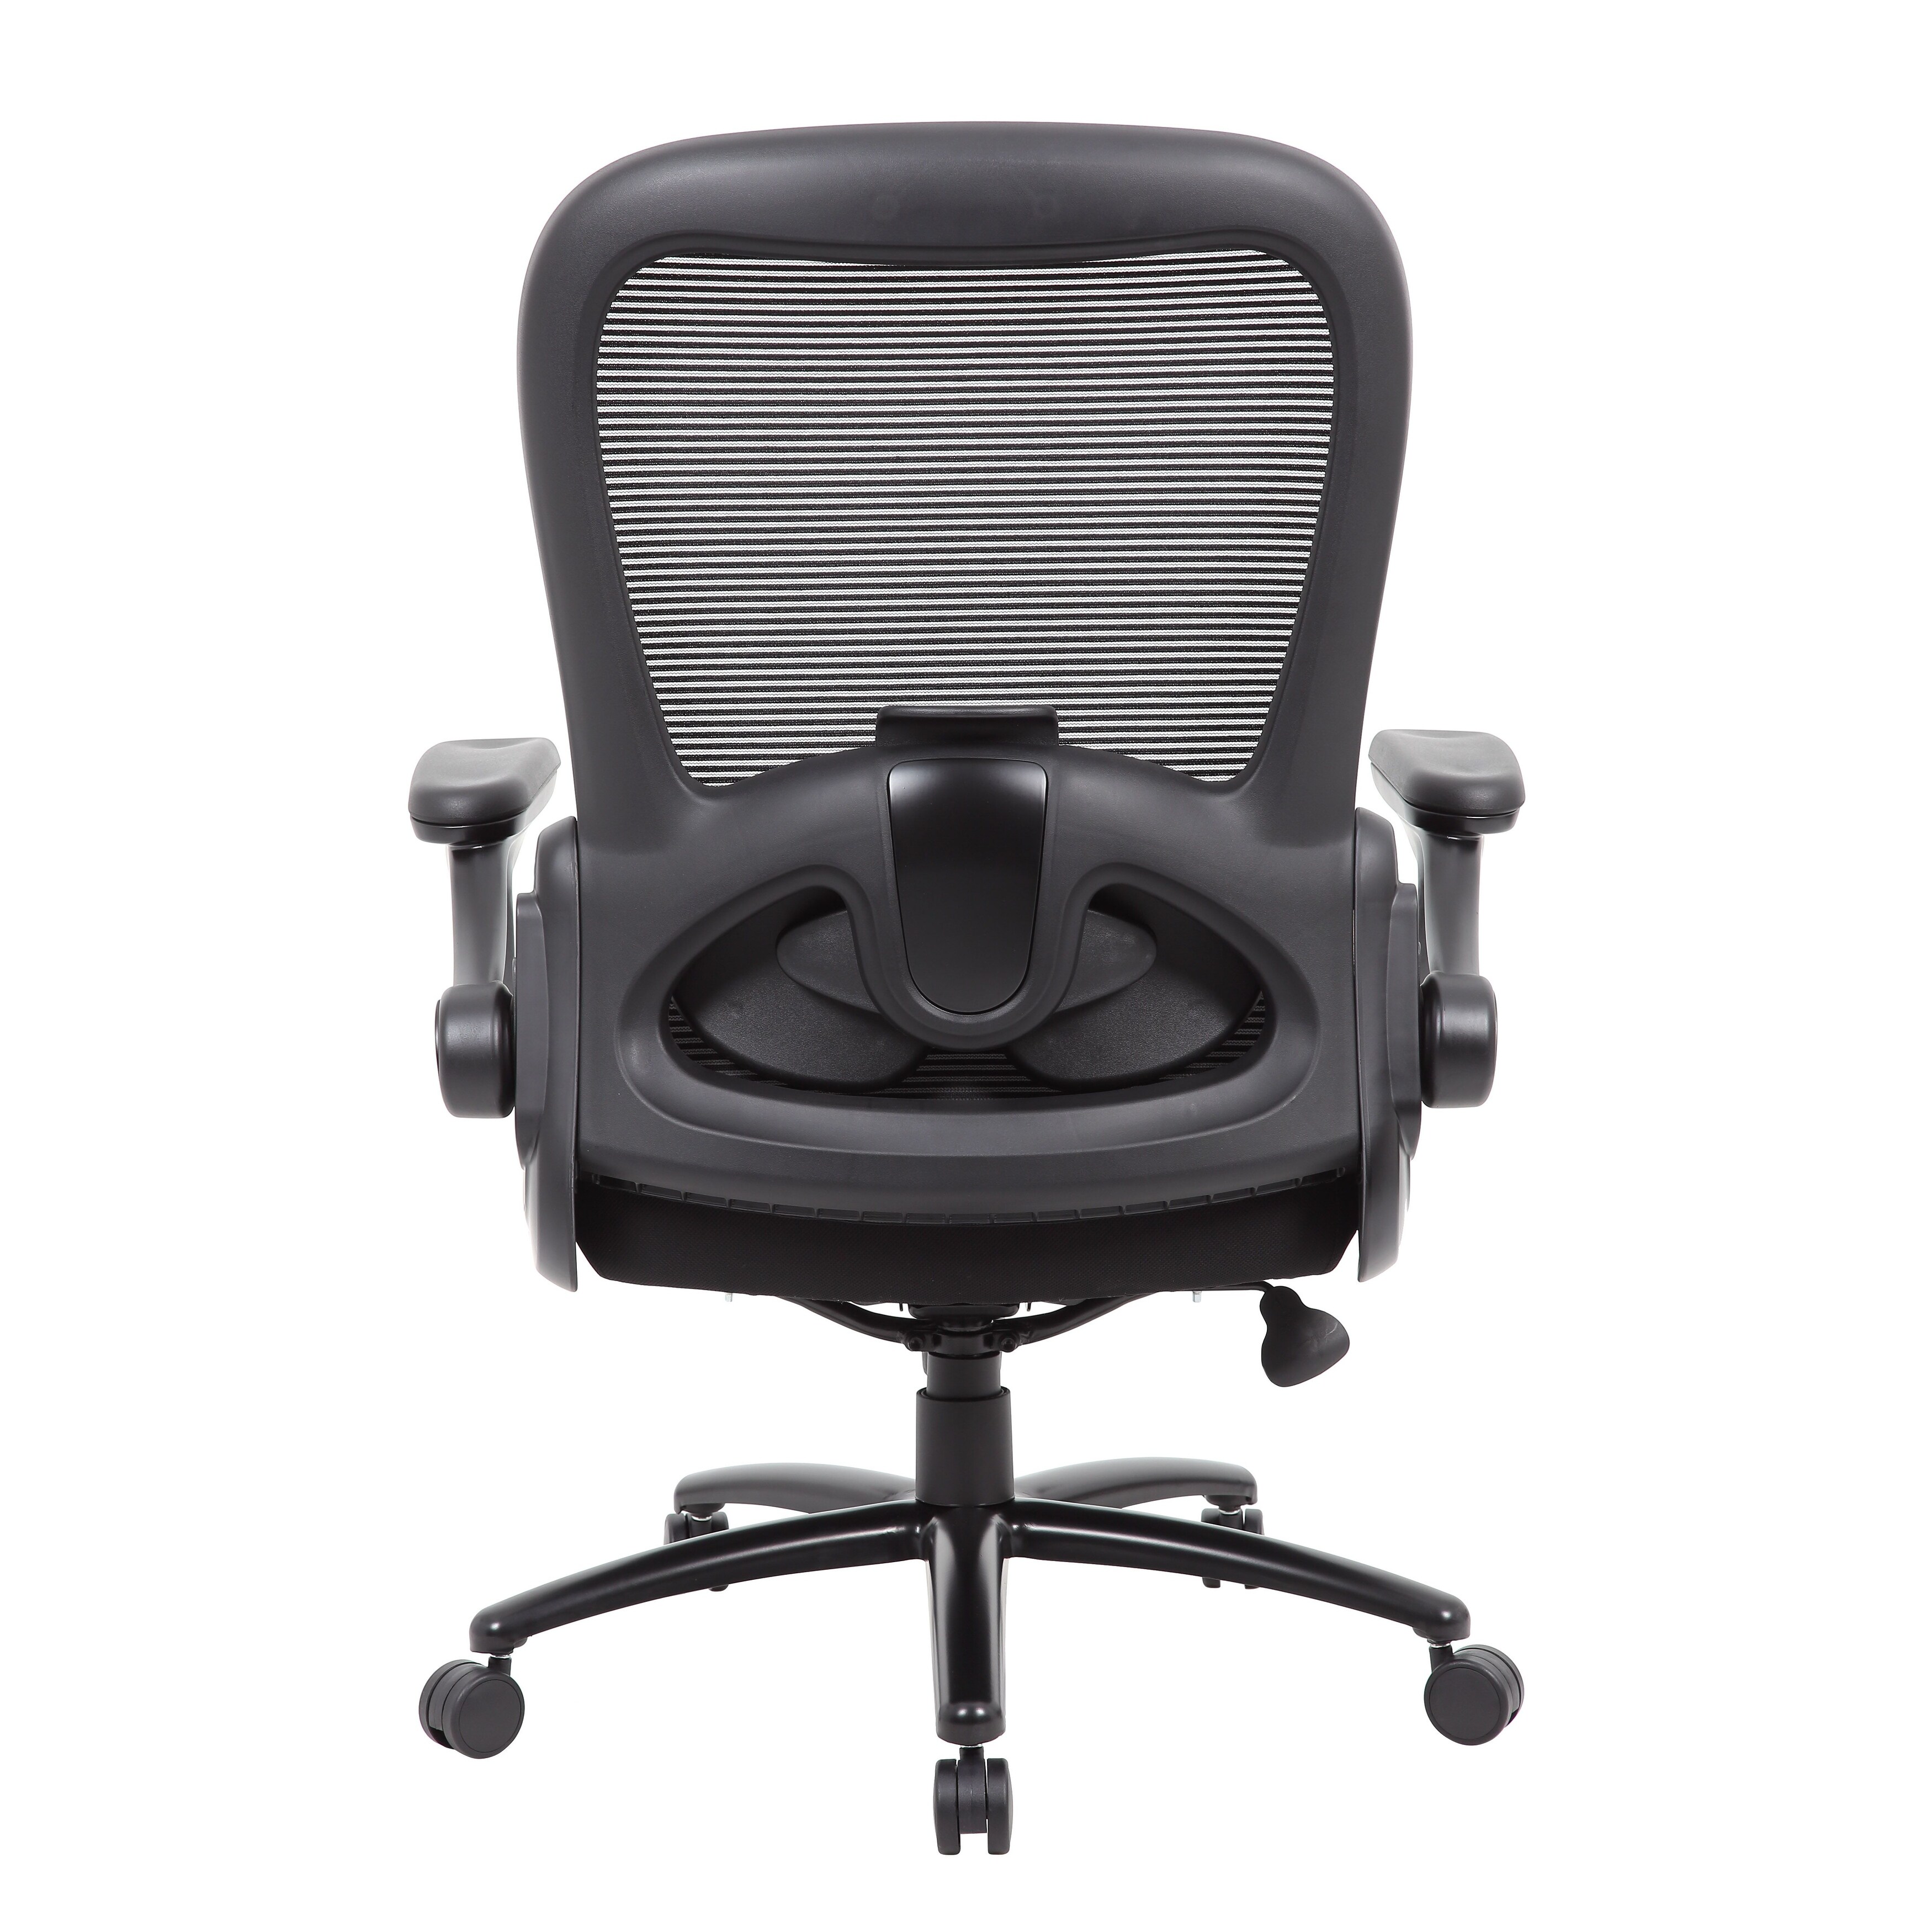 Low Back Office Chair with Arms - Black by Boss Office Products